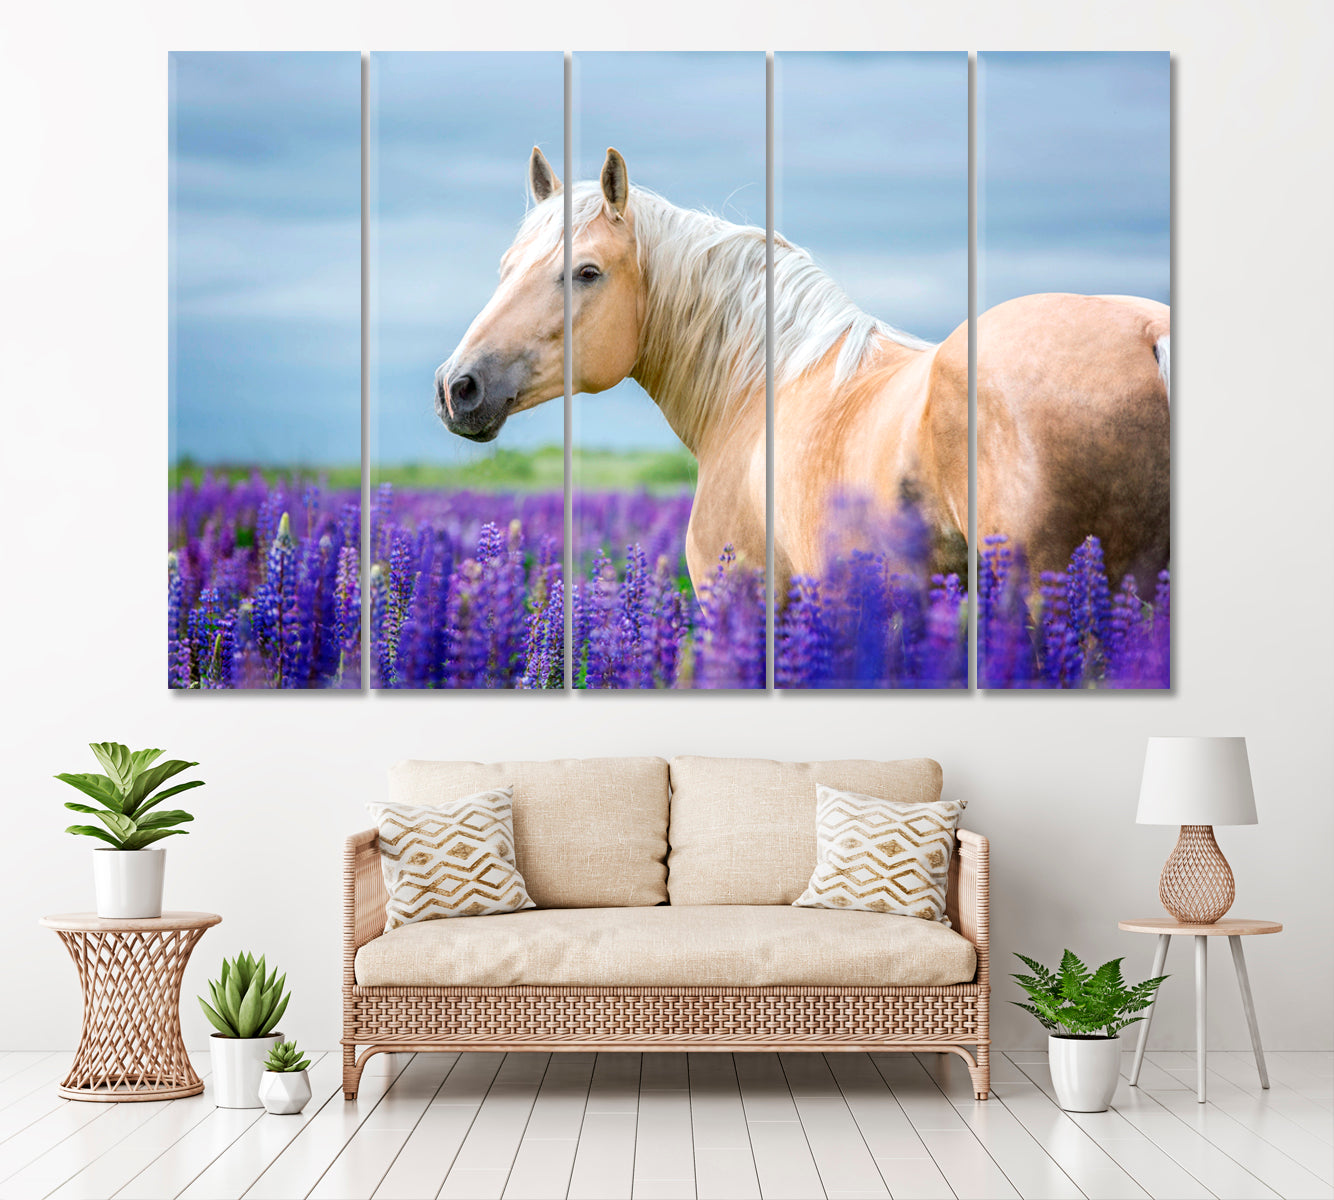 Palomino Horse in Flower Field Canvas Print ArtLexy 5 Panels 36"x24" inches 